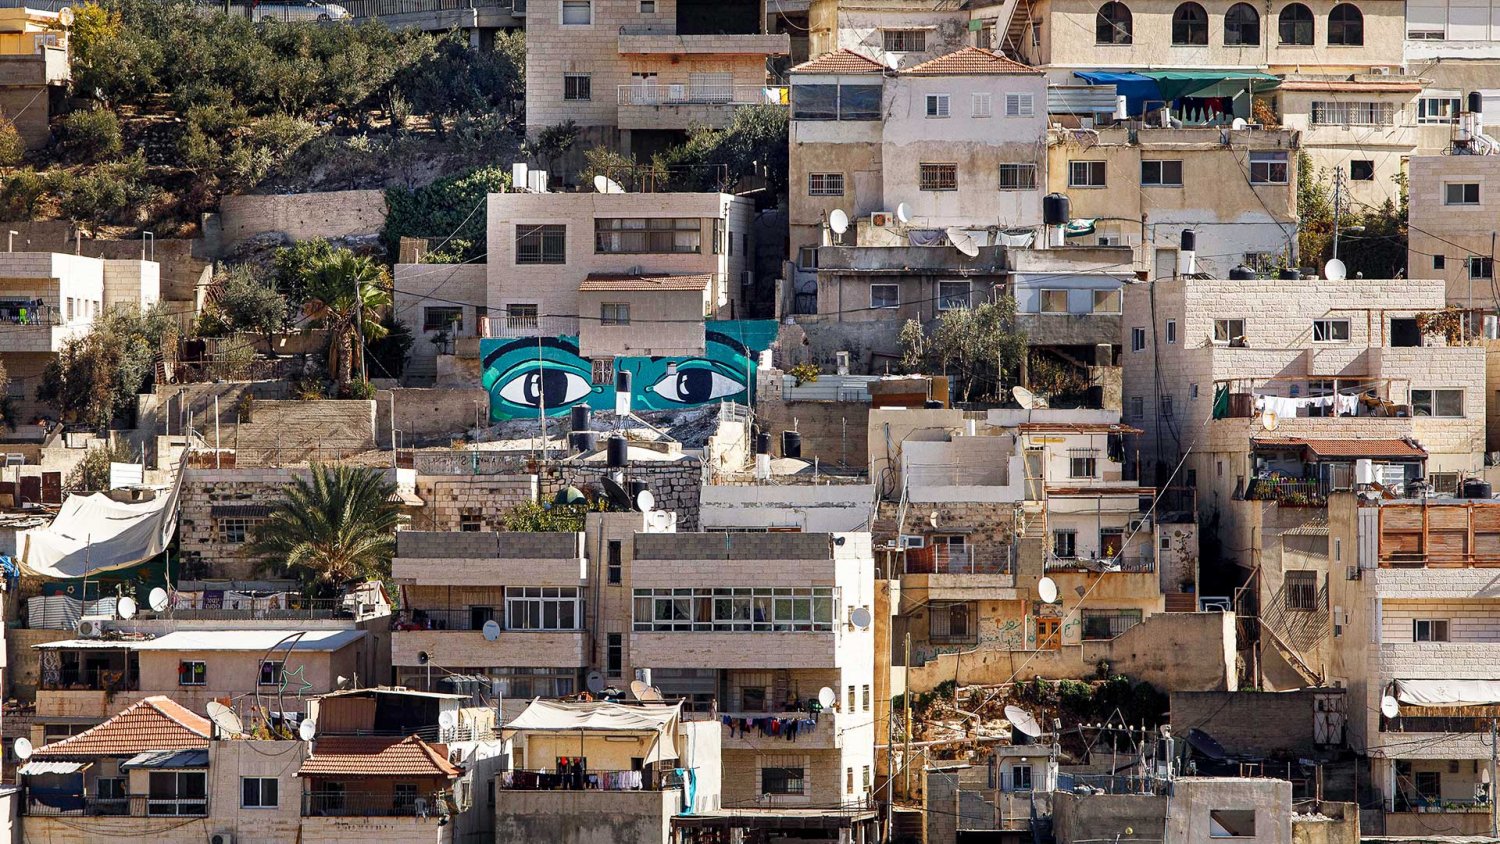 Grafitti eyes painted on homes in Silwan, Jerusalem, as part of an art installation